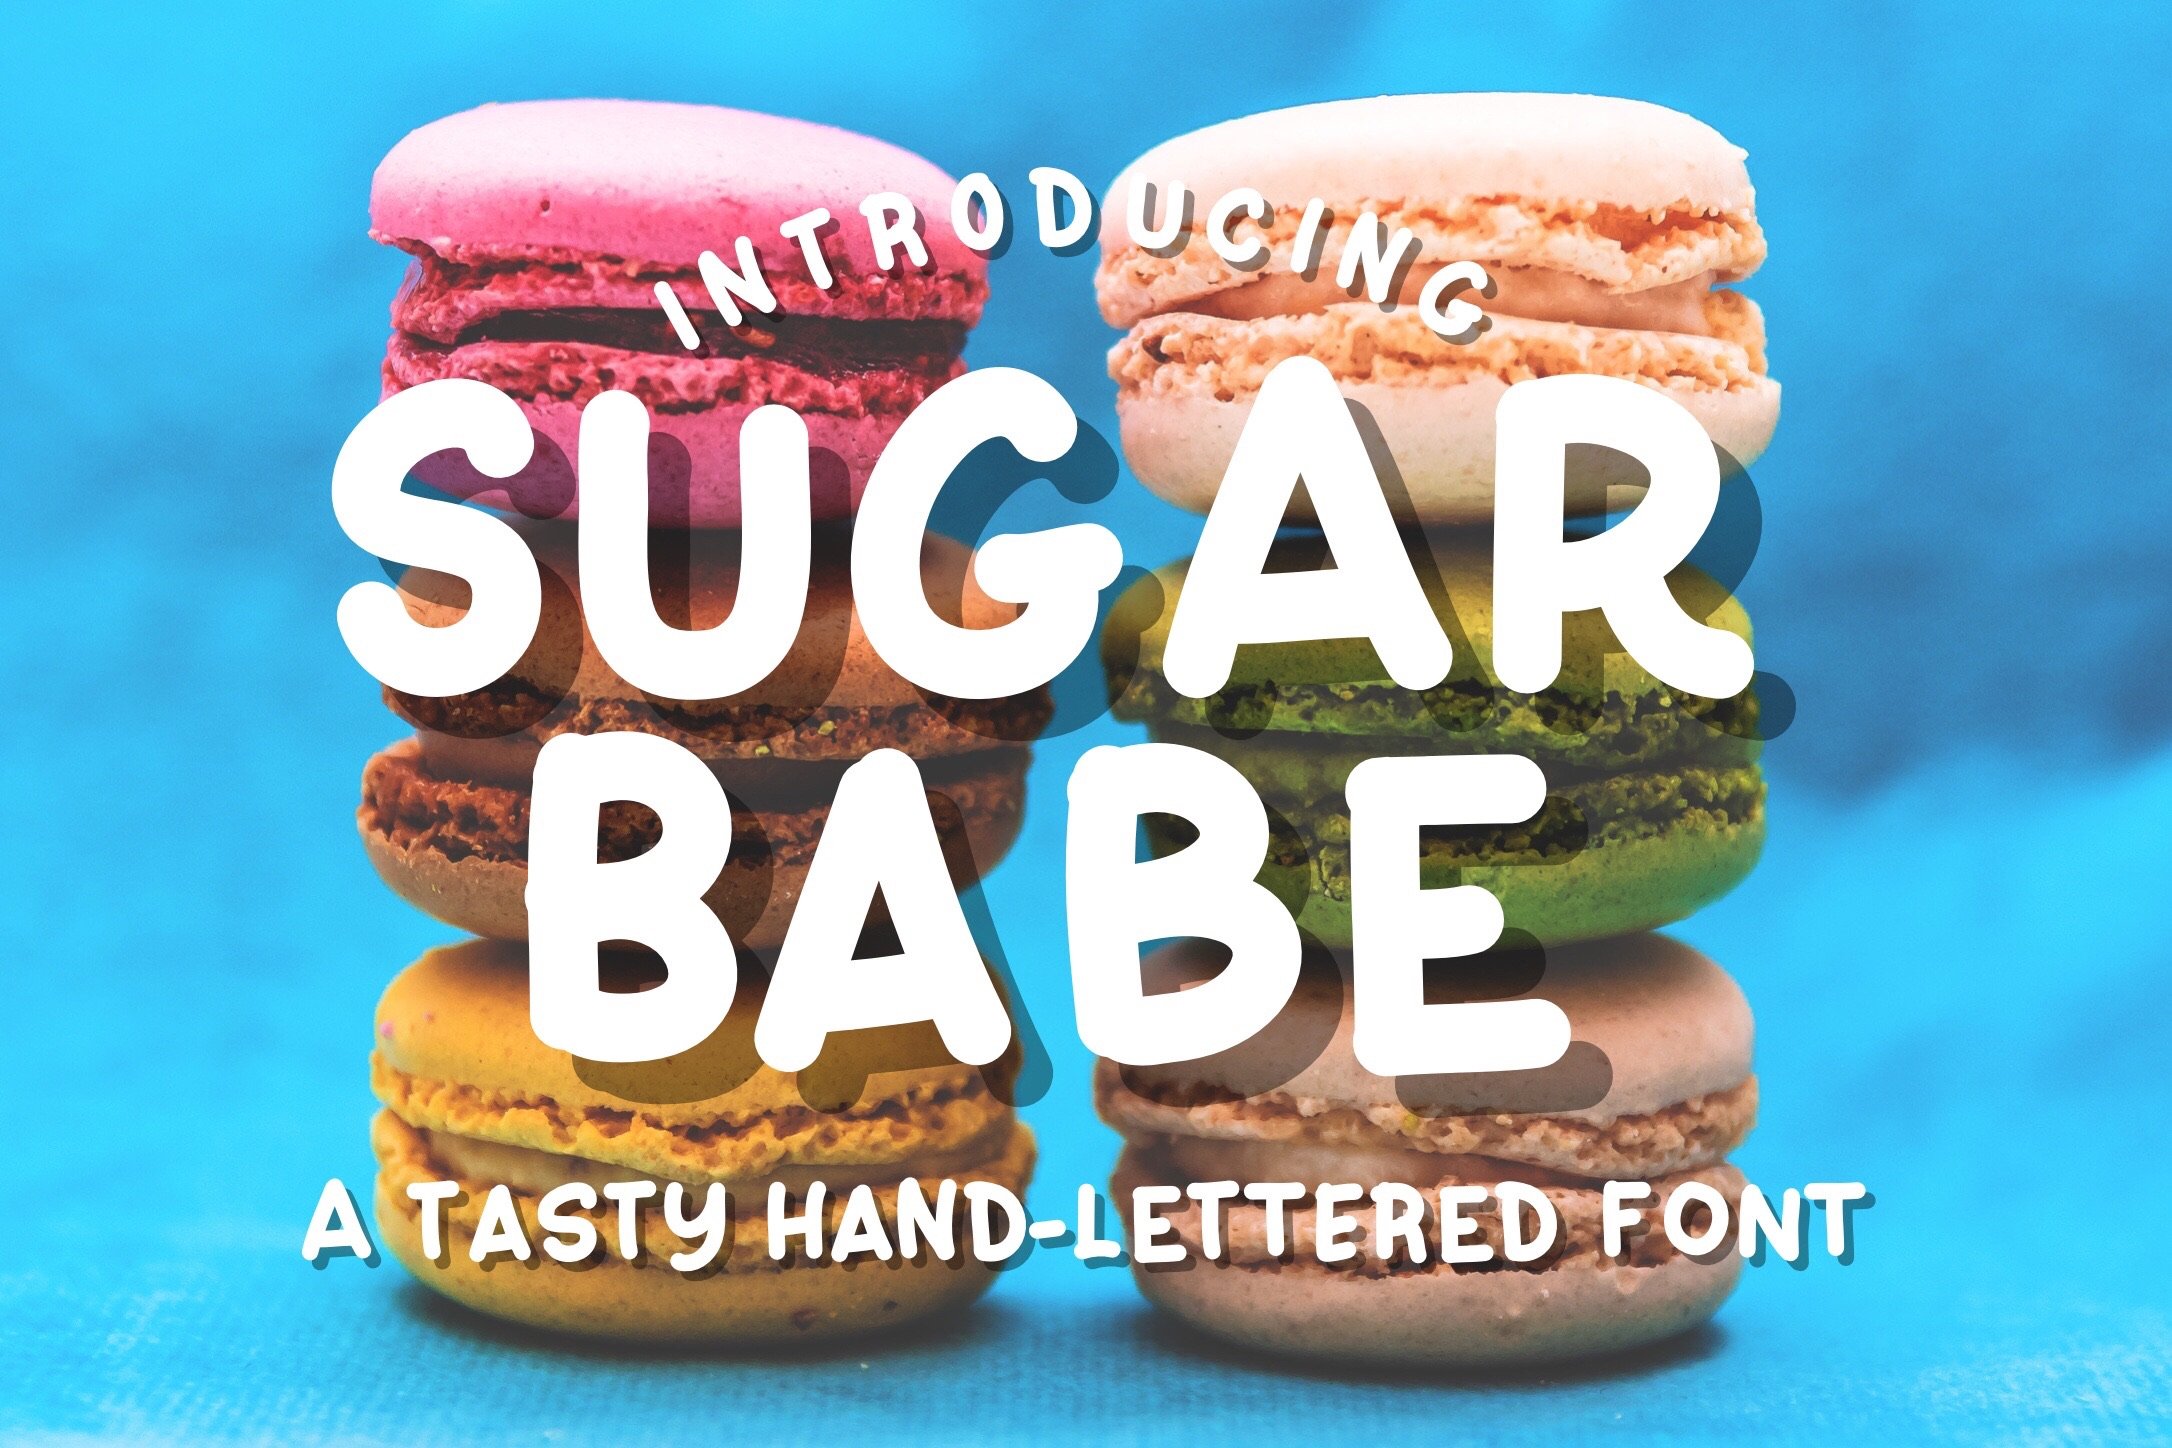 Sugar Babe hand-lettered font cover image.